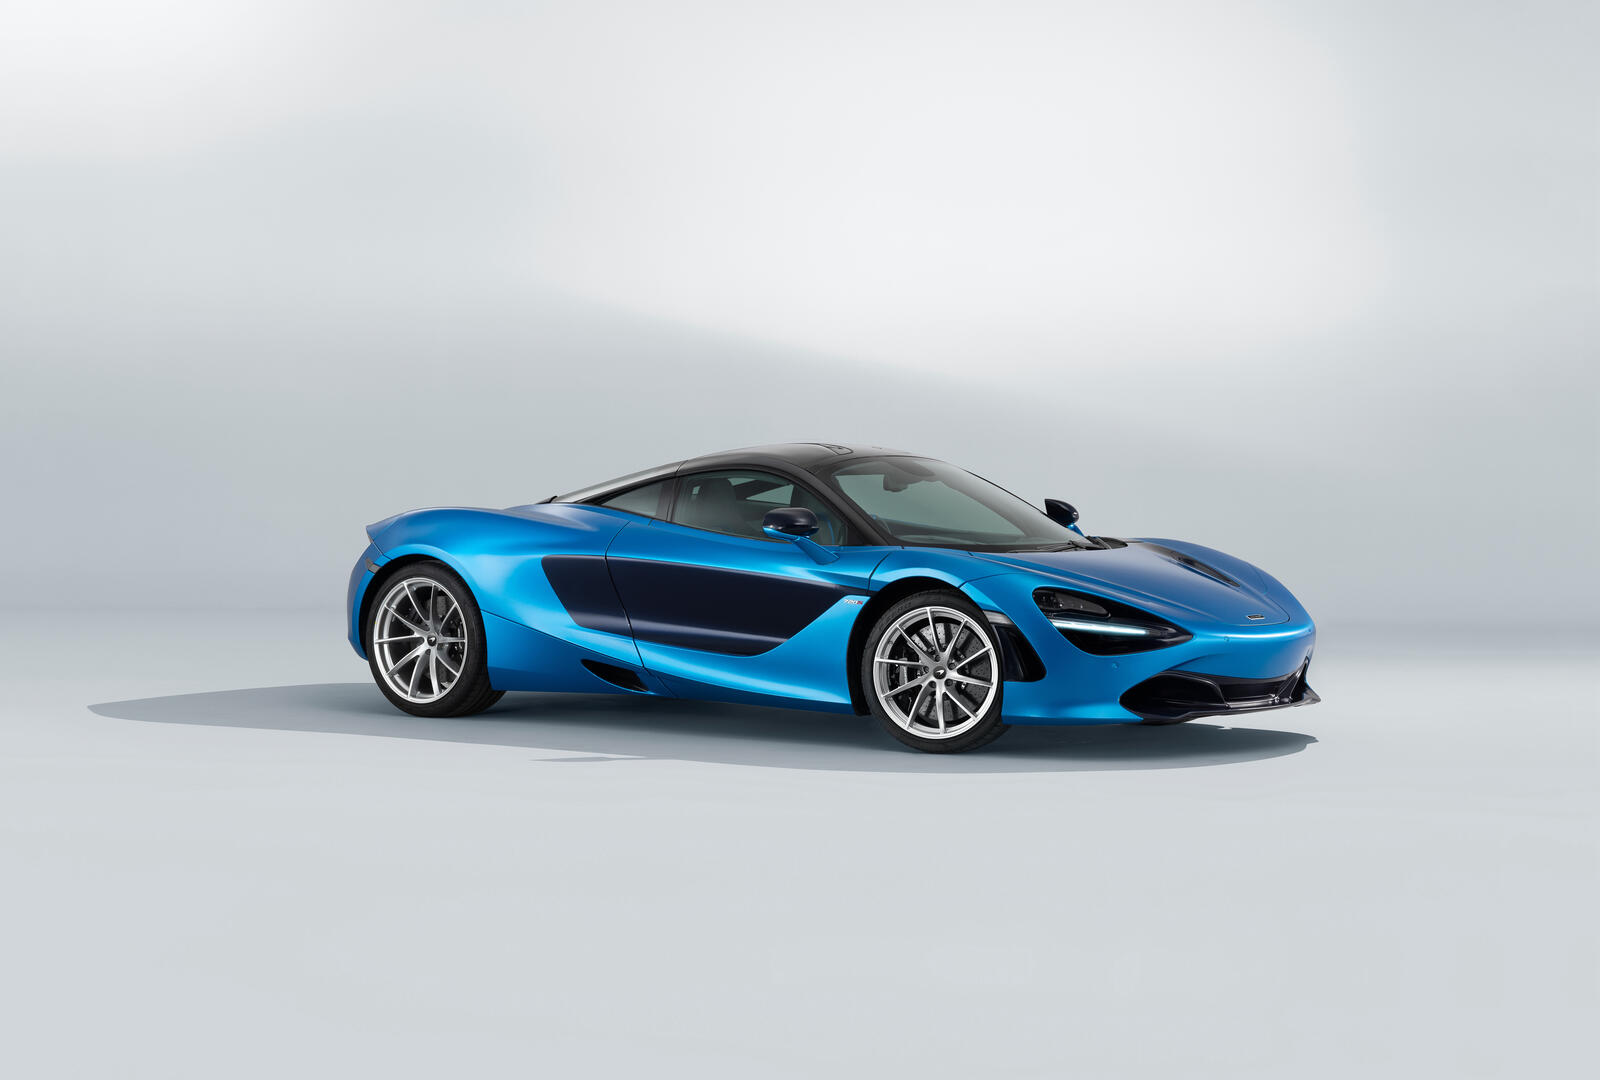 Free photo 2018 Mclaren 720S in blue on a white background